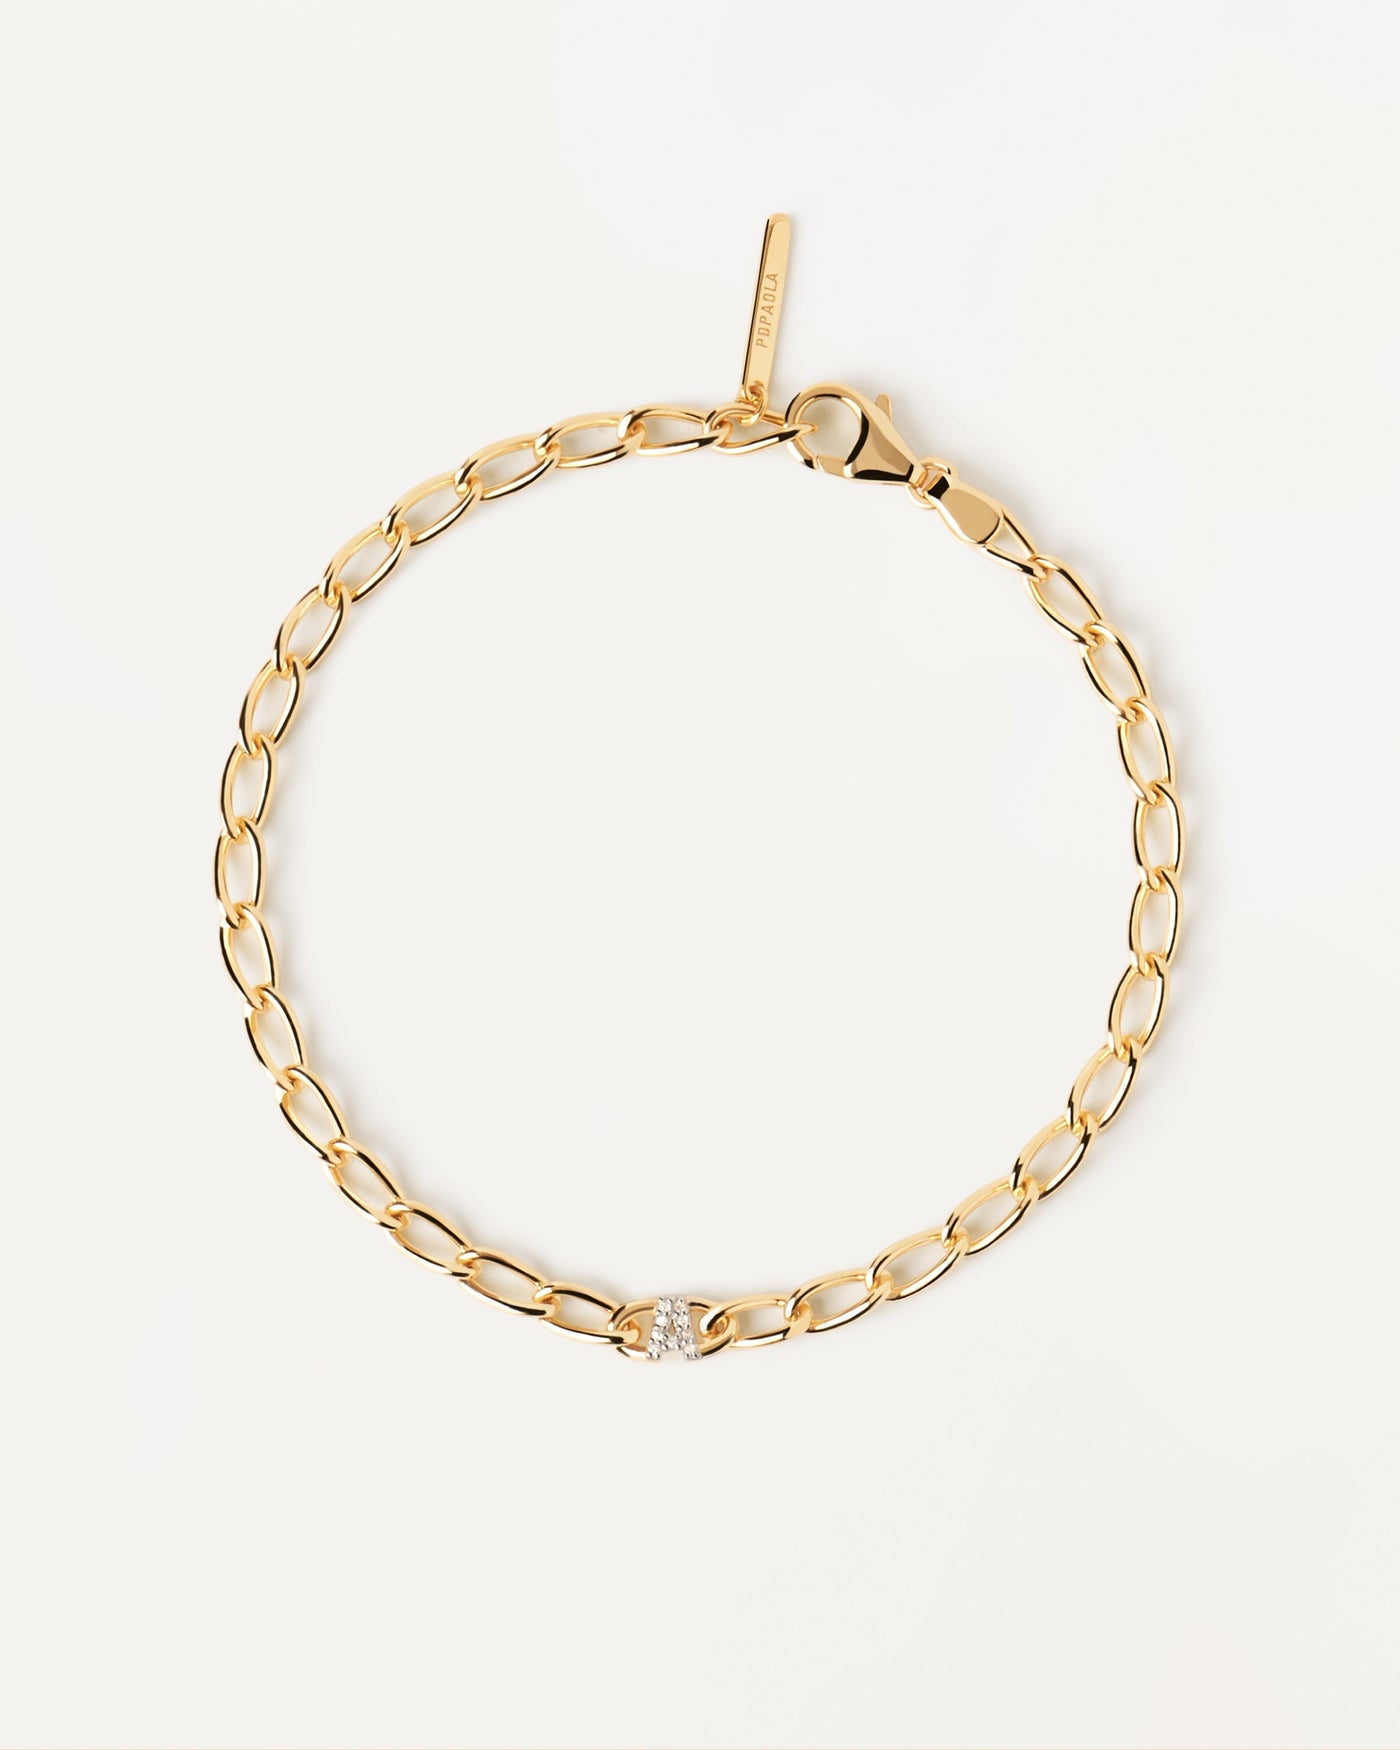 2023 Selection | Letter A Chain Bracelet. cable chain bracelet in gold-plated silver with initial A in zirconia. Get the latest arrival from PDPAOLA. Place your order safely and get this Best Seller. Free Shipping.